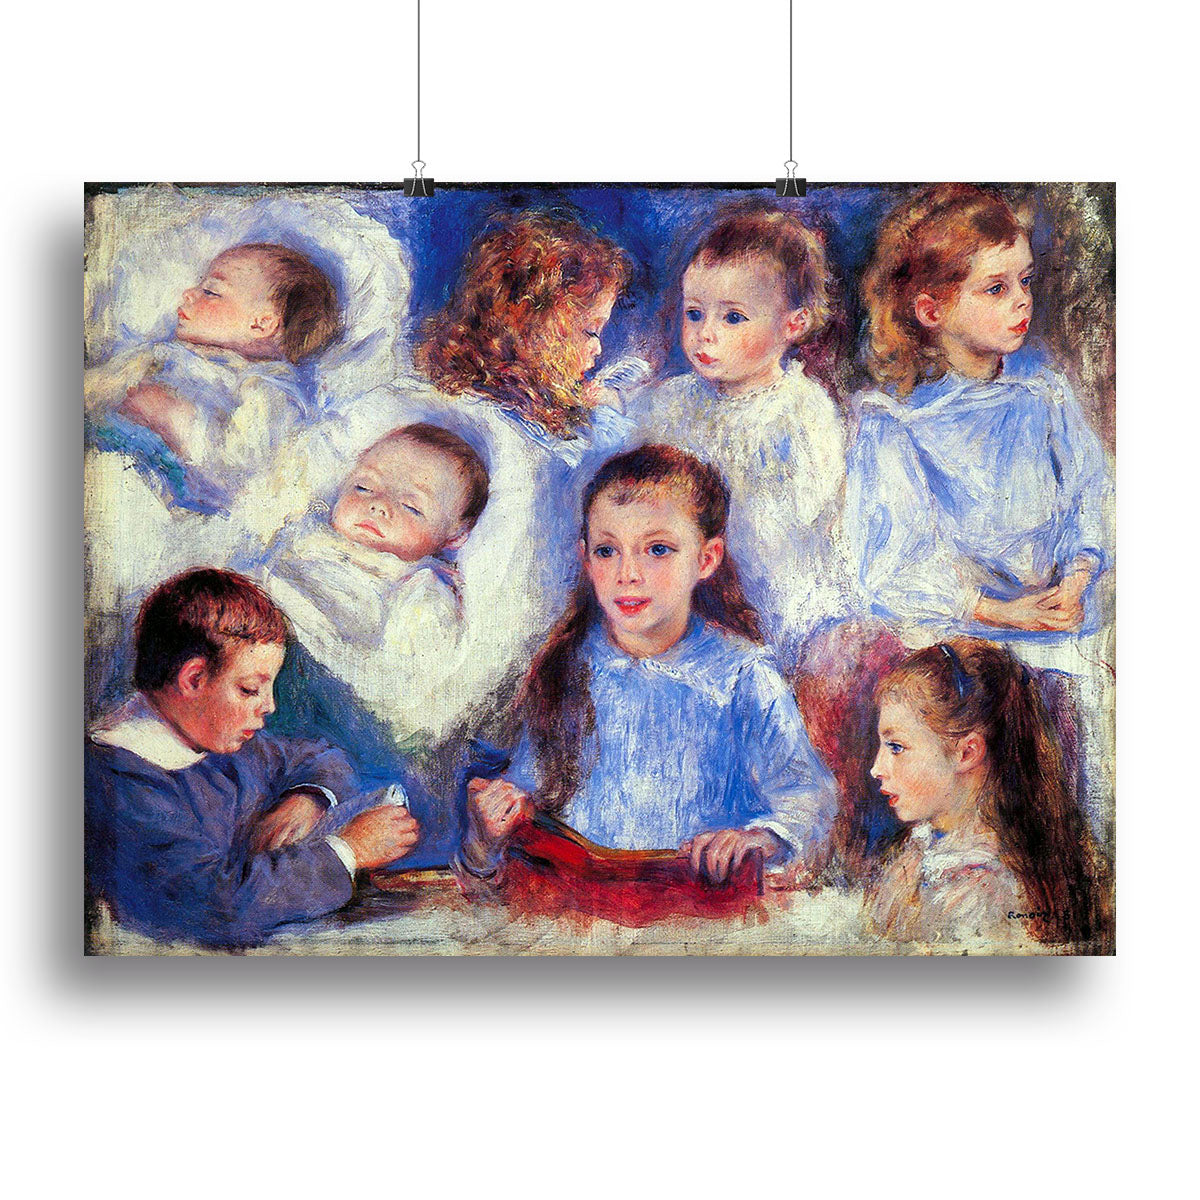 Images of childrens character heads by Renoir Canvas Print or Poster - Canvas Art Rocks - 2